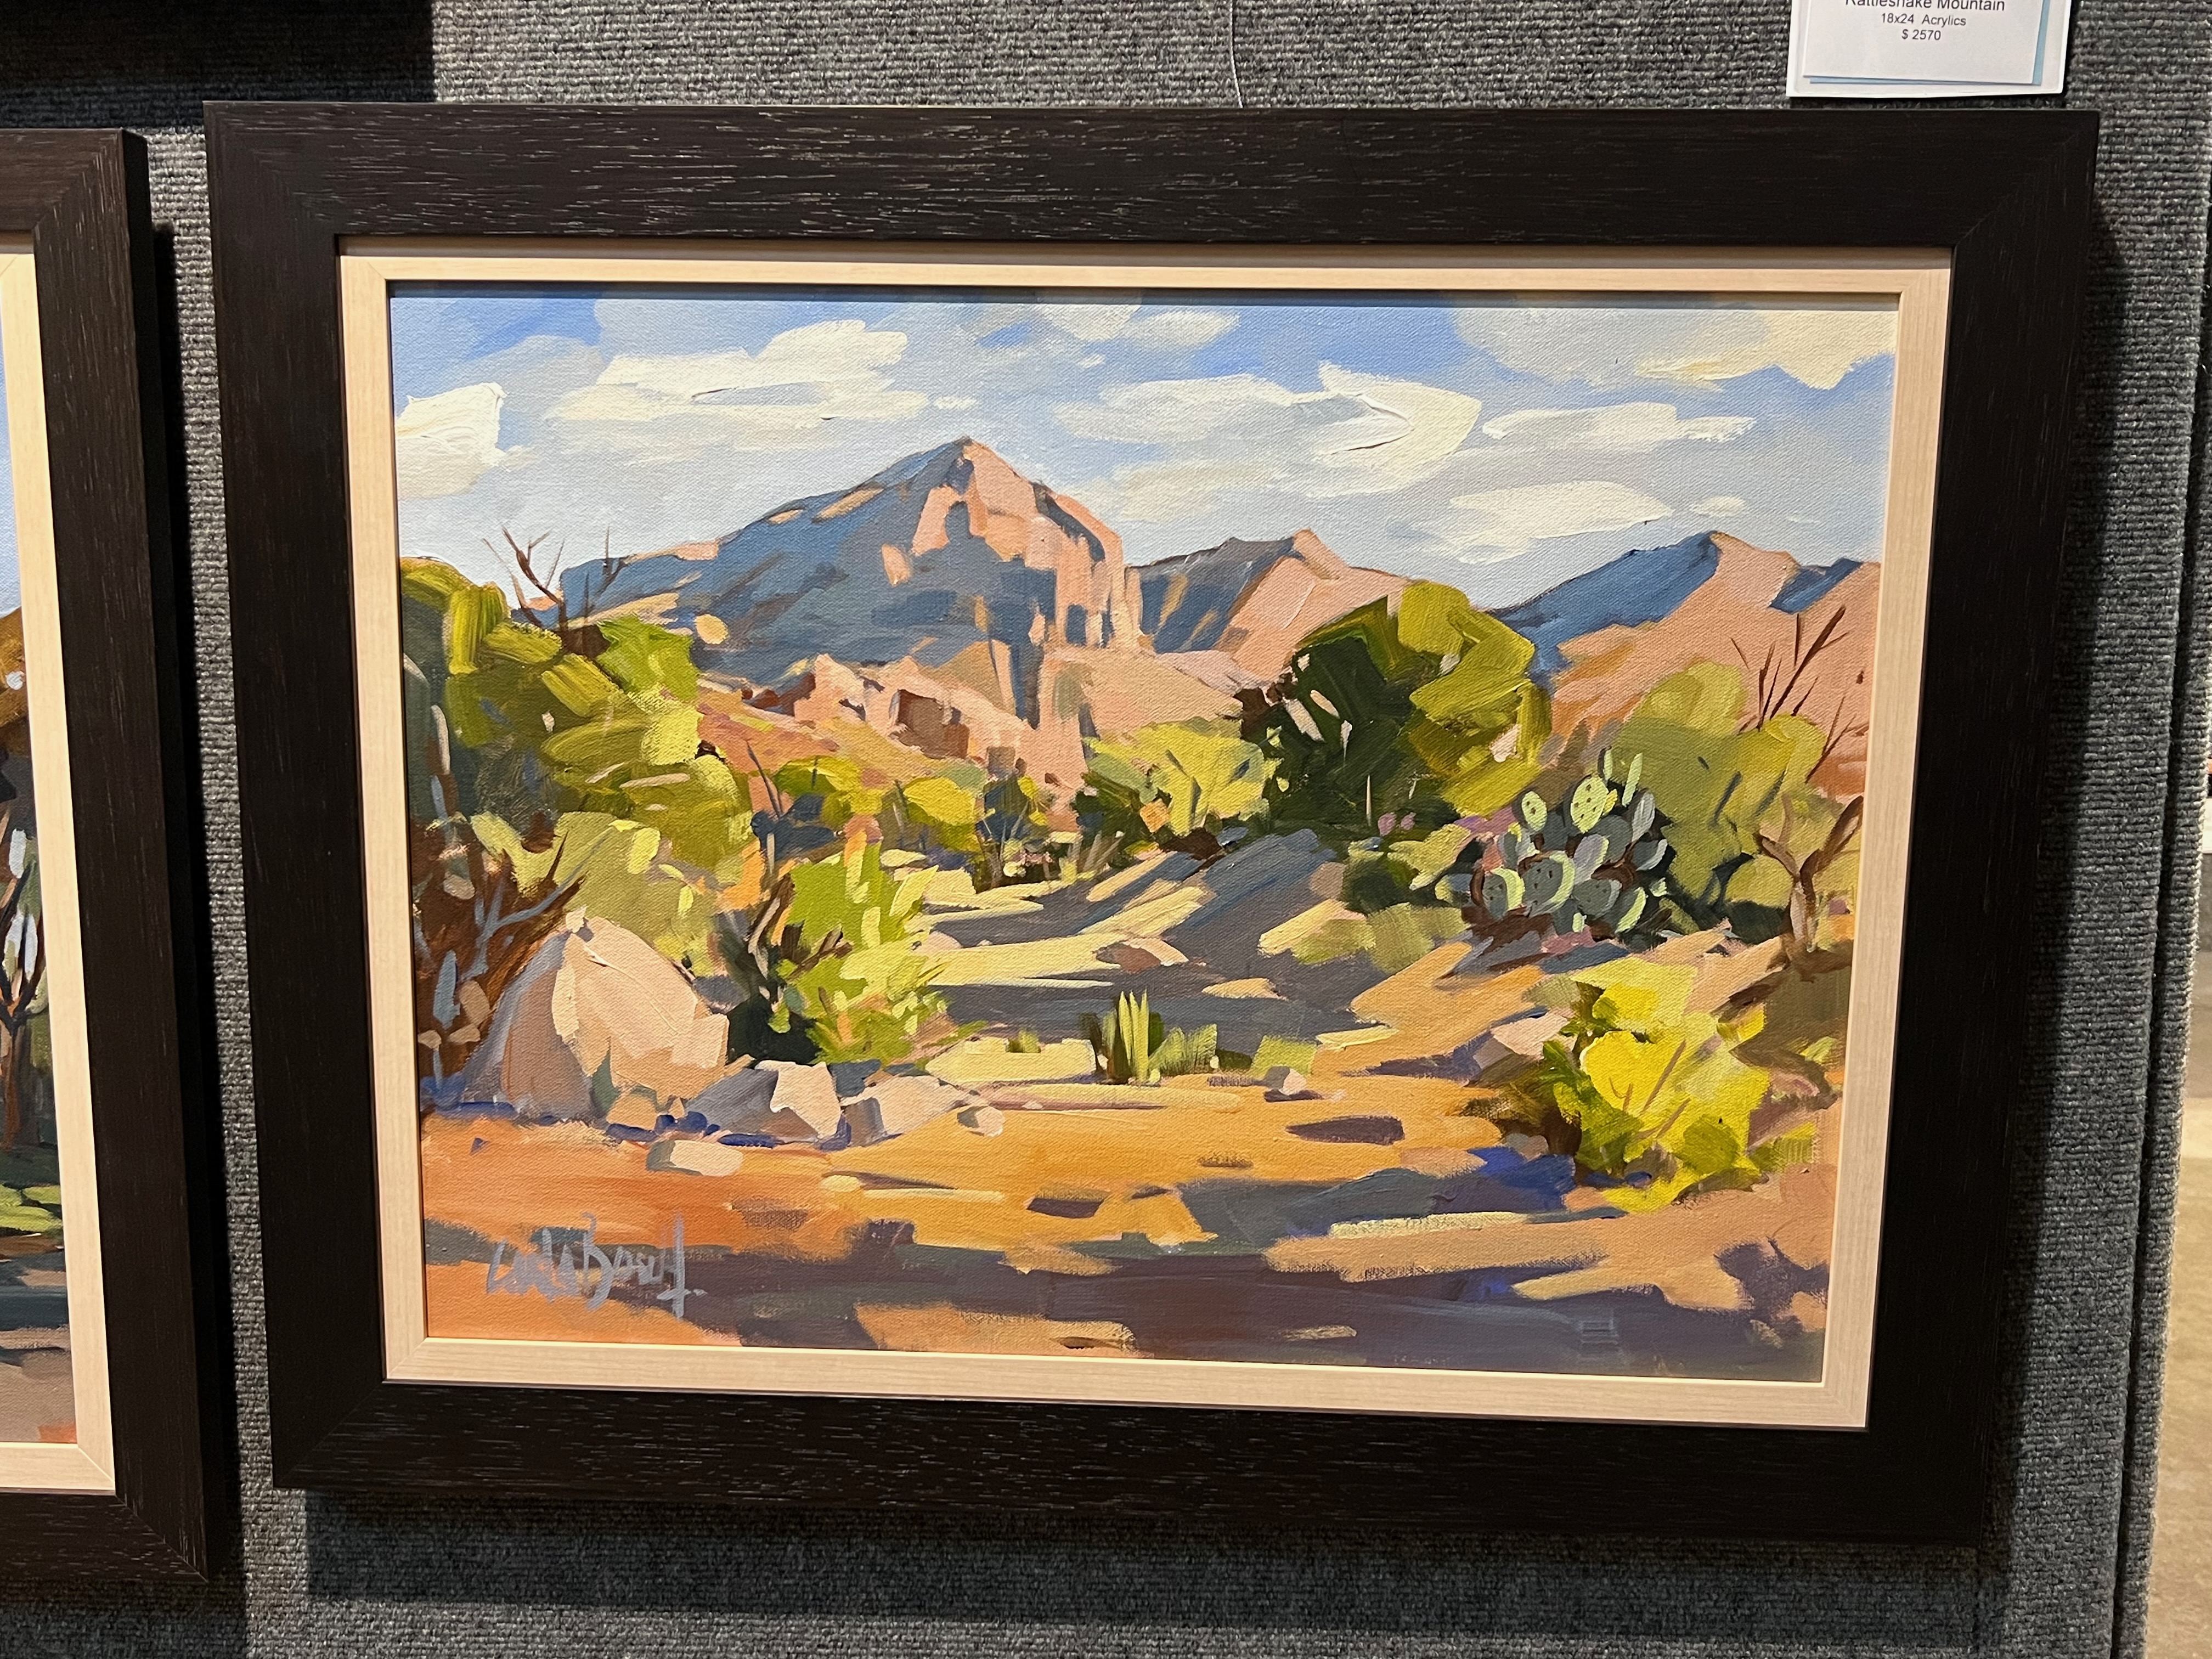 Artists for San Angelo's 2021 En Plein Air event to be revealed Friday